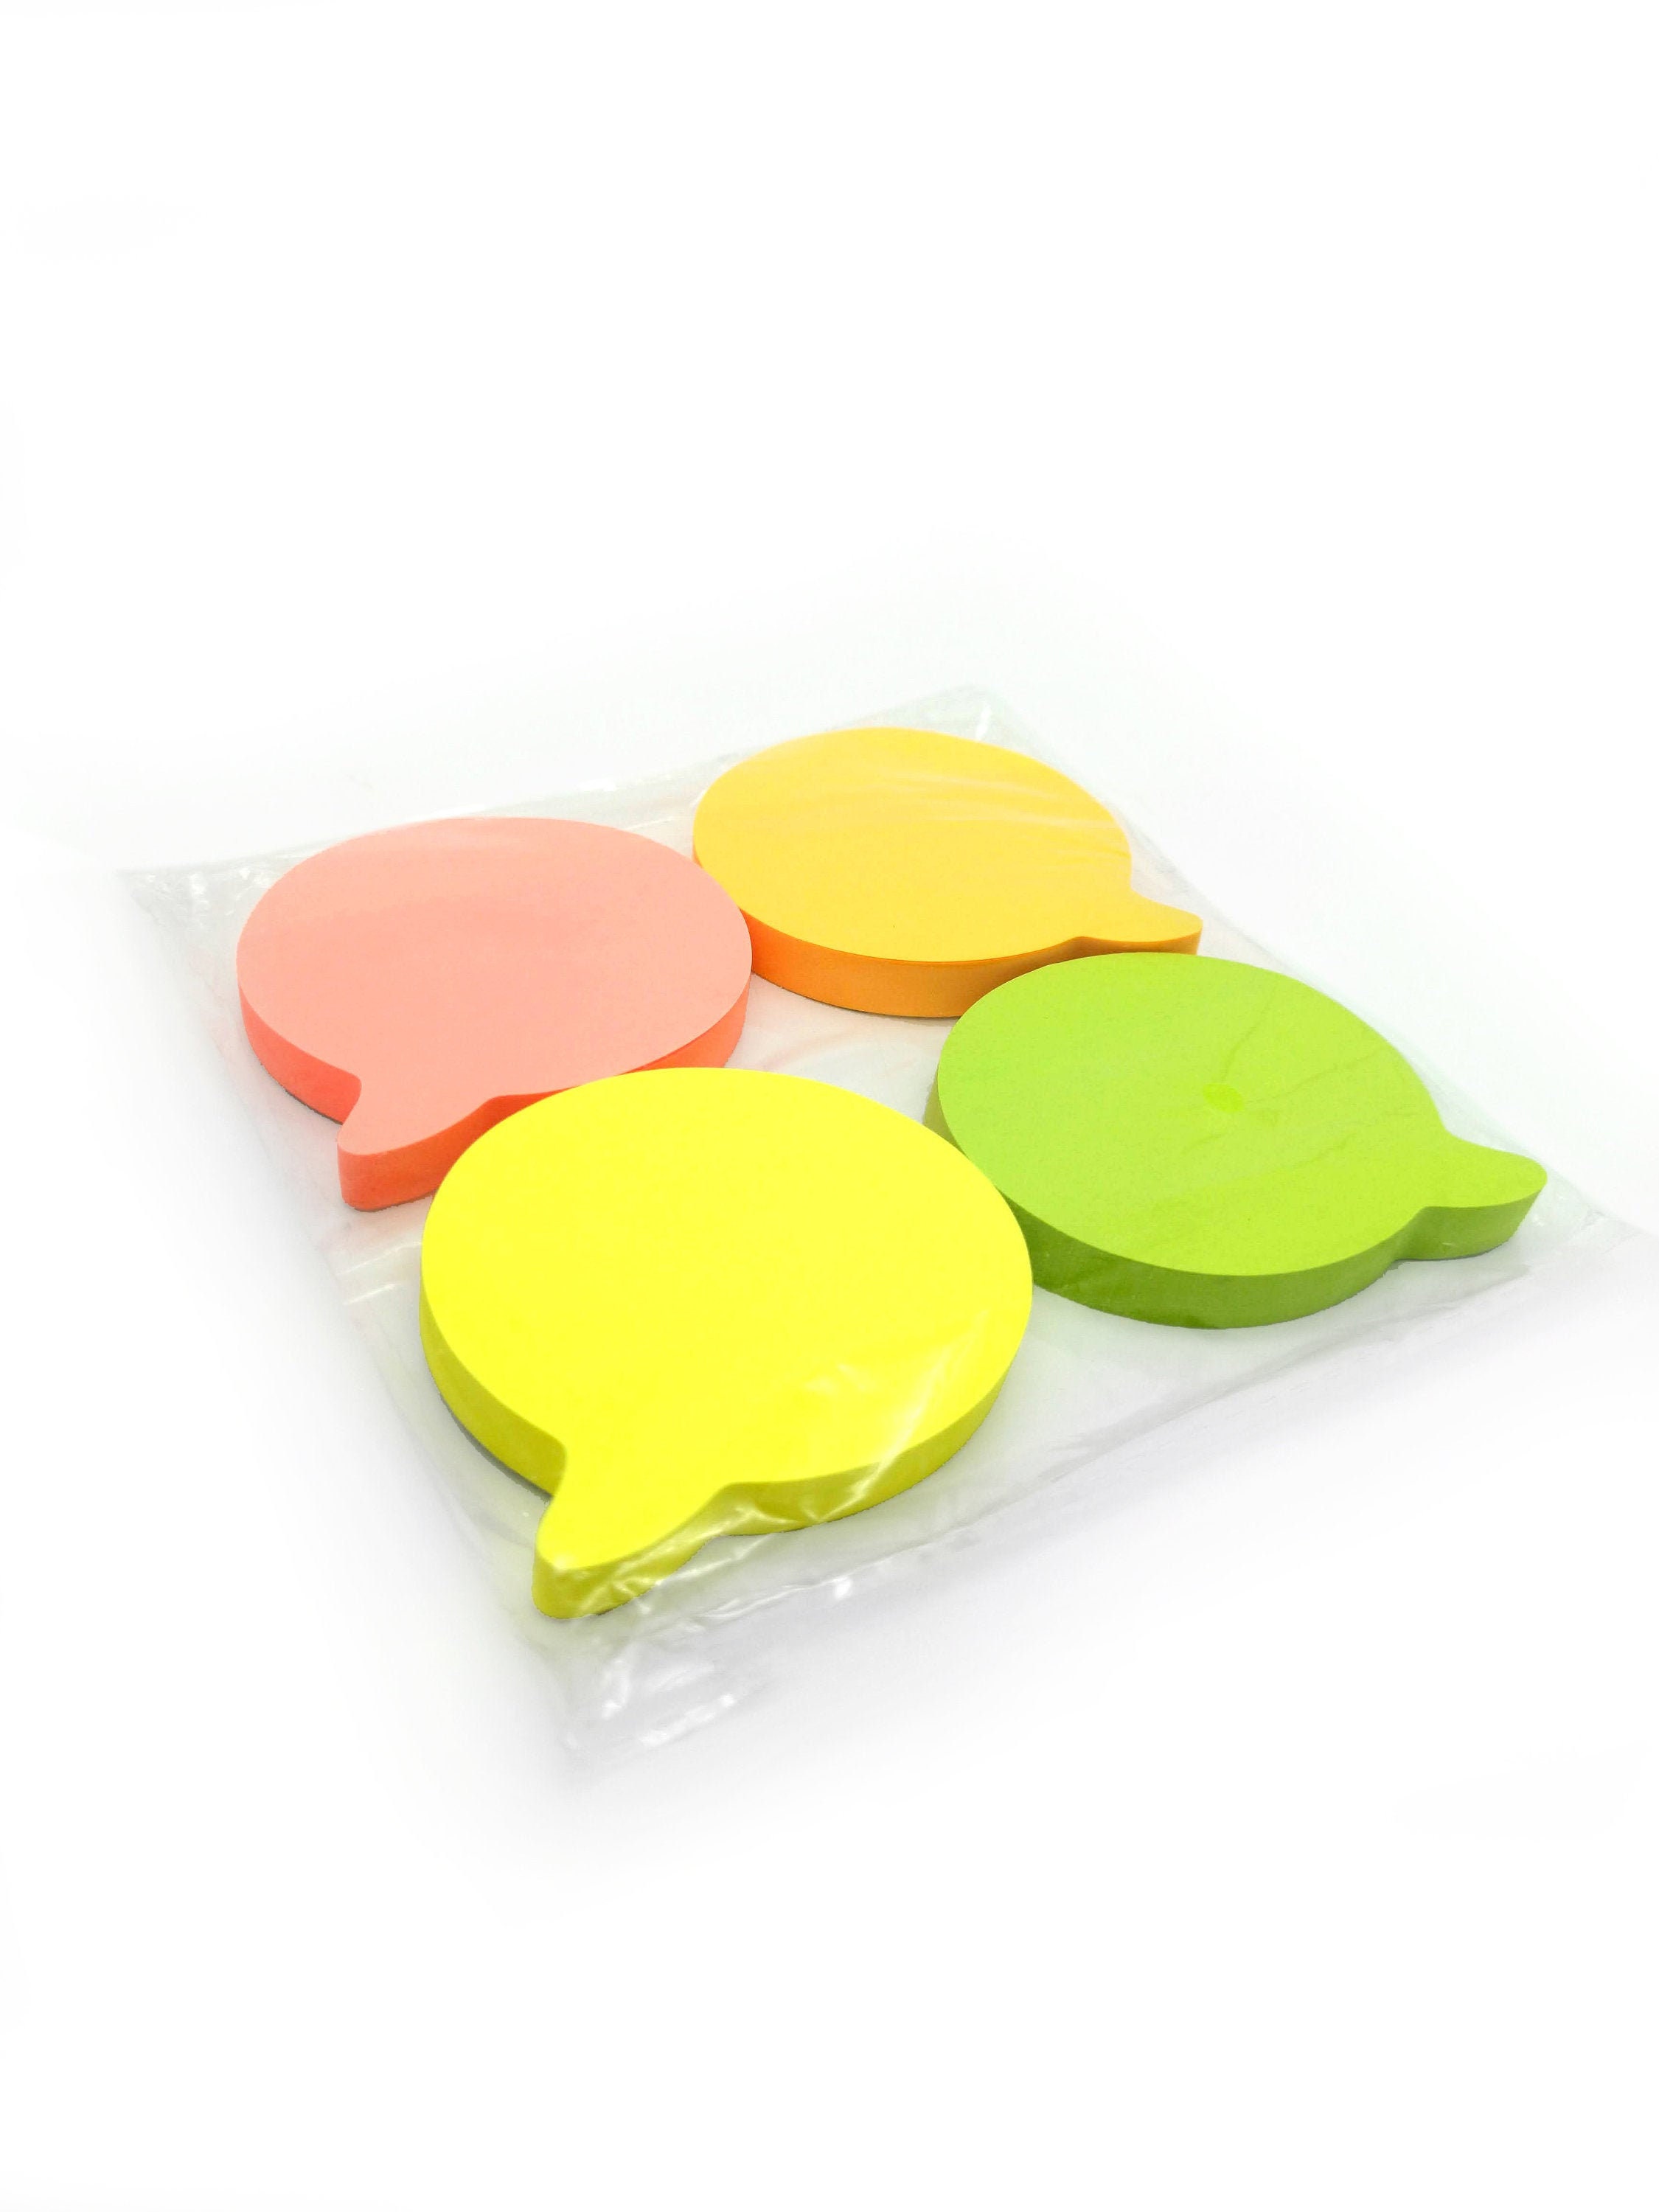 Heart Sticky Notes / Neon Post It Notes / Memo Pads of 100 Pages Each  76x76mm / Great for Studying, Reminders & to Do Lists 